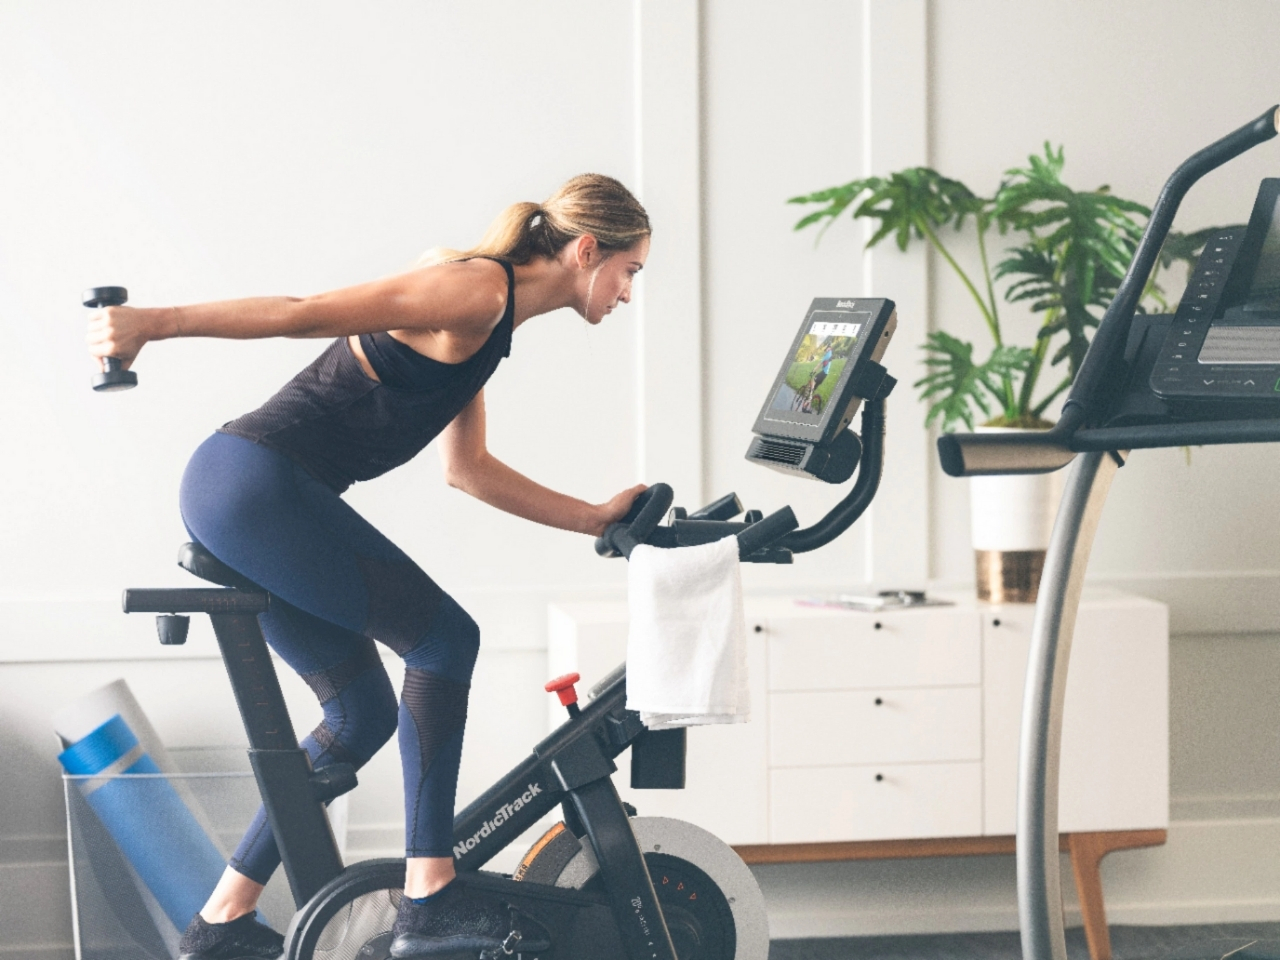 The future of smart fitness is subscriptions, but it shouldn't be